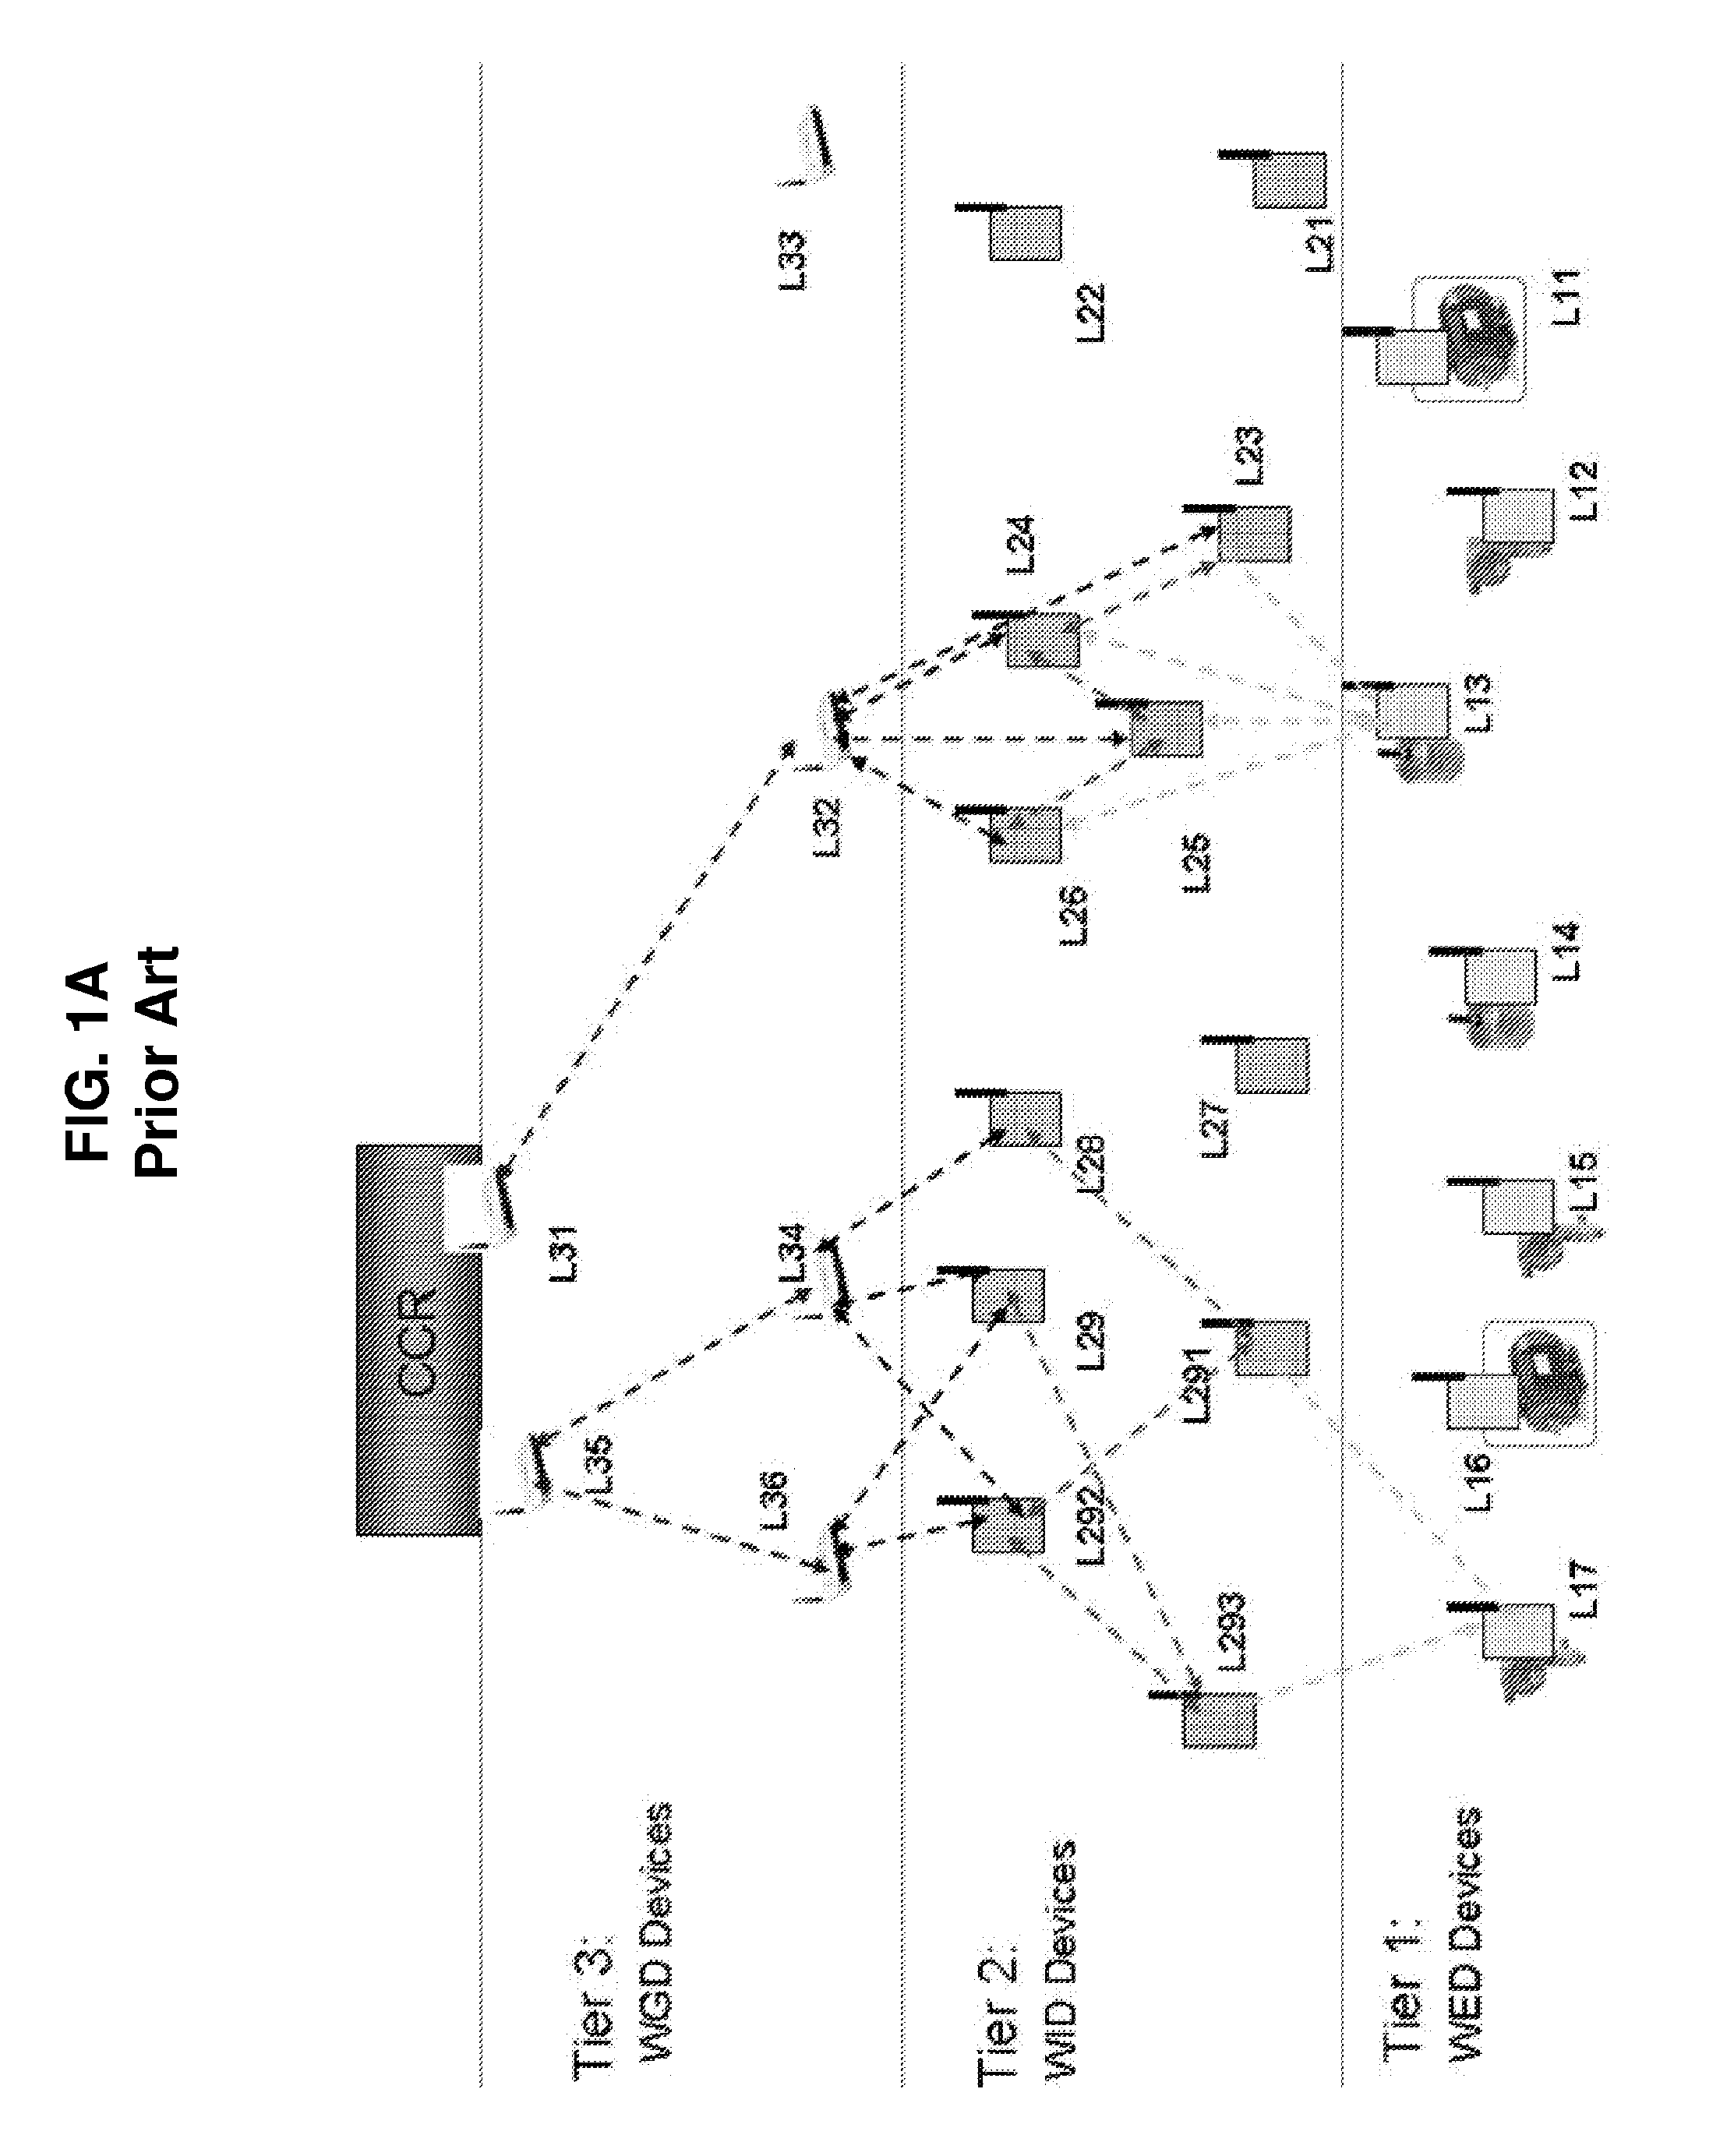 Adaptive wireless process control system and method